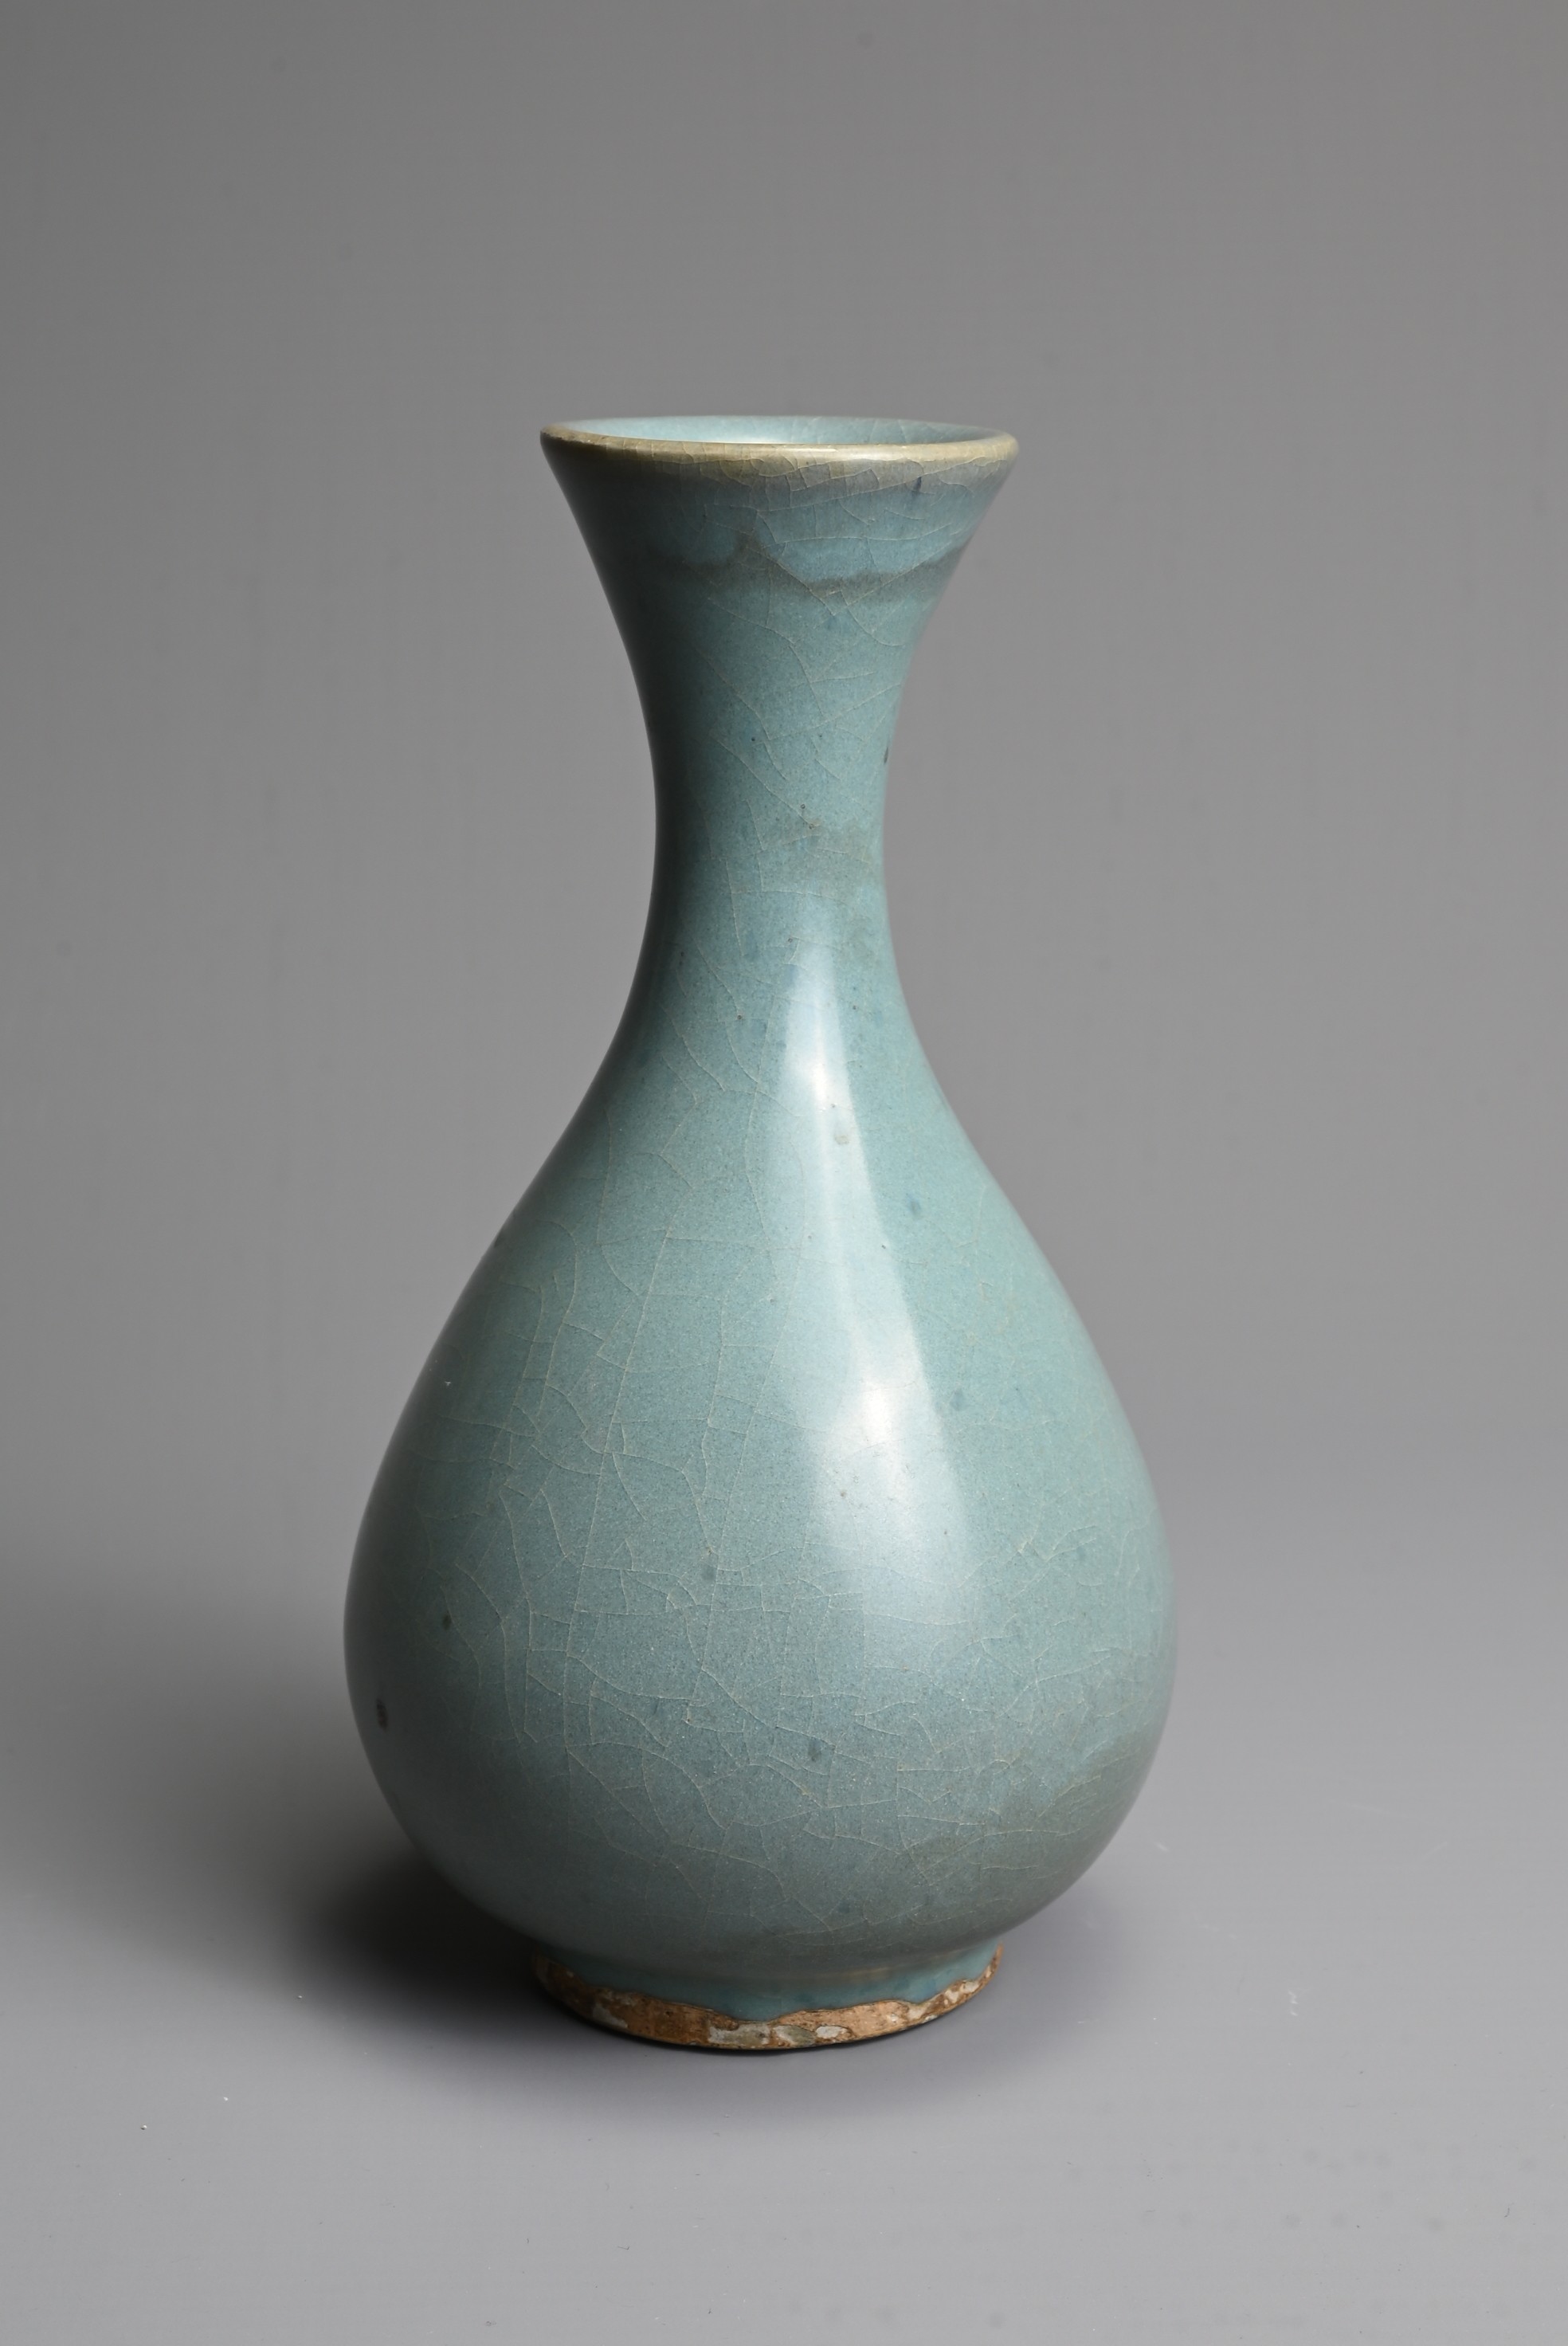 A CHINESE JUN TYPE BOTTLE VASE, SONG / YUAN DYNASTY. Pear shaped bottle with flared rim covered in a